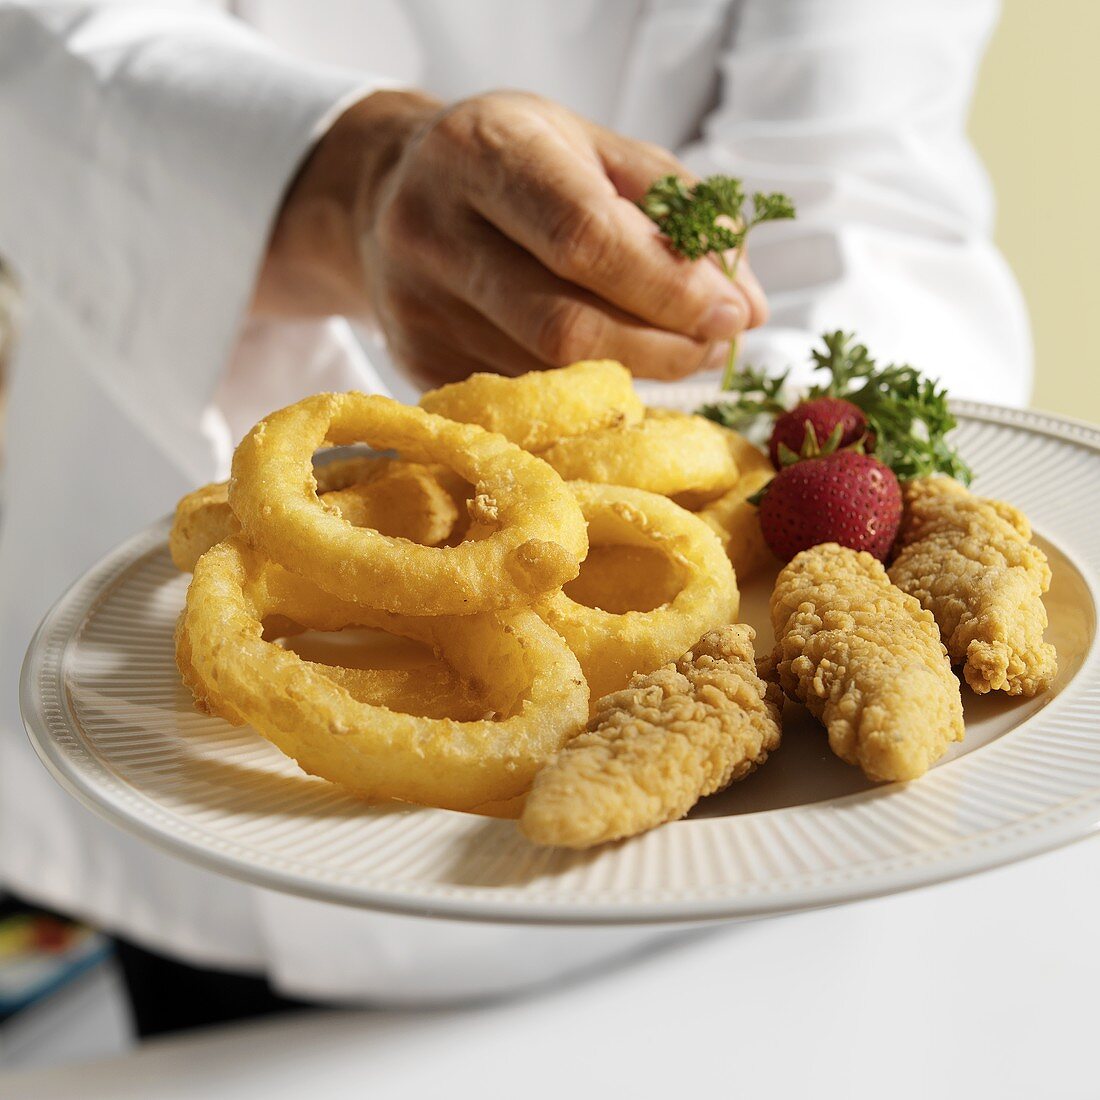 A Chef Placing a Parsley Garnish on a Plate of Chicken Tenders and Onion Rings